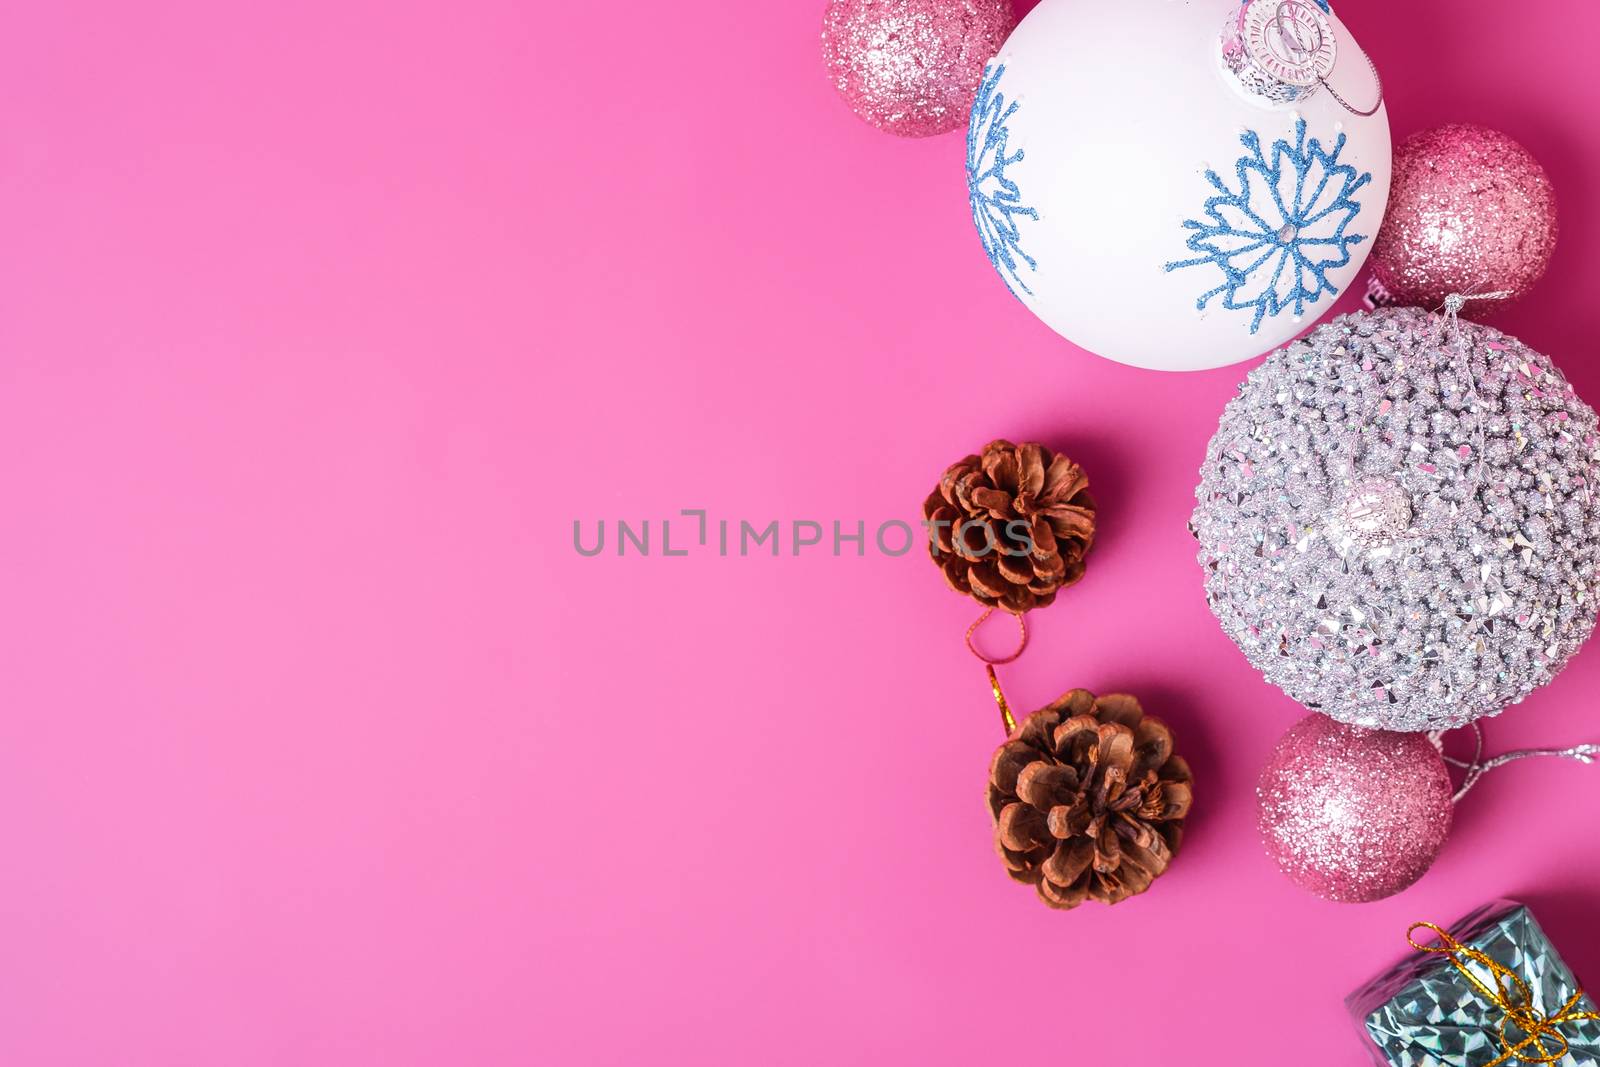 Christmas New Year composition. Gifts, fir tree cones, silver ball decorations on pink background. Winter holidays concept. Flat lay, top view, copy space